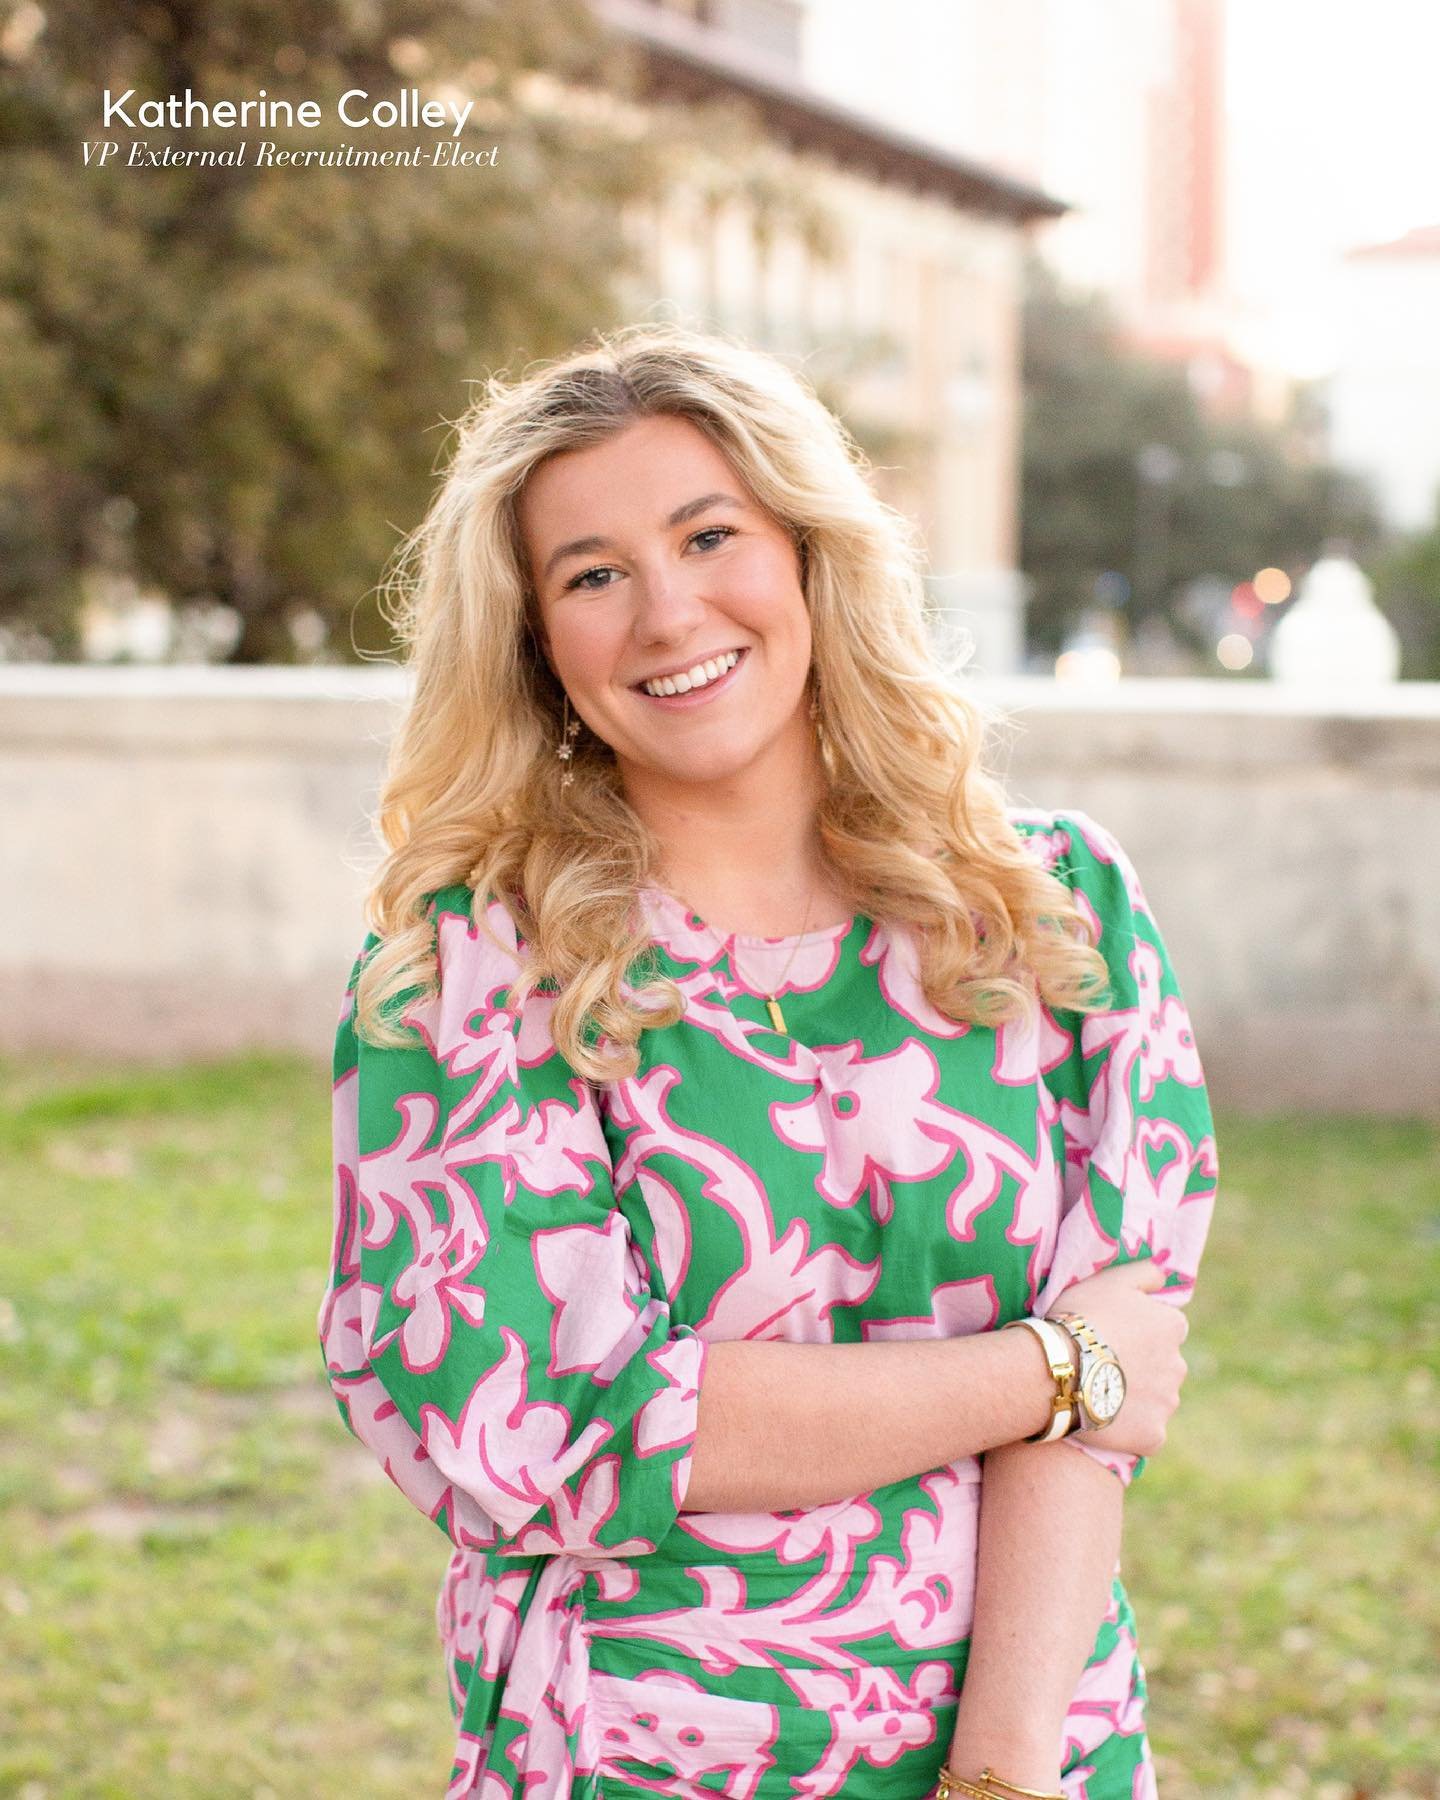 Meet Katherine Colley, VP External Recruitment-Elect!

Hometown: Houston, Texas
Major: Human Dimensions of Organizations
Minors: Business, Social and Behavioral Sciences

&ldquo;I&rsquo;m excited to serve as VP External Recruitment-Elect for the Univ